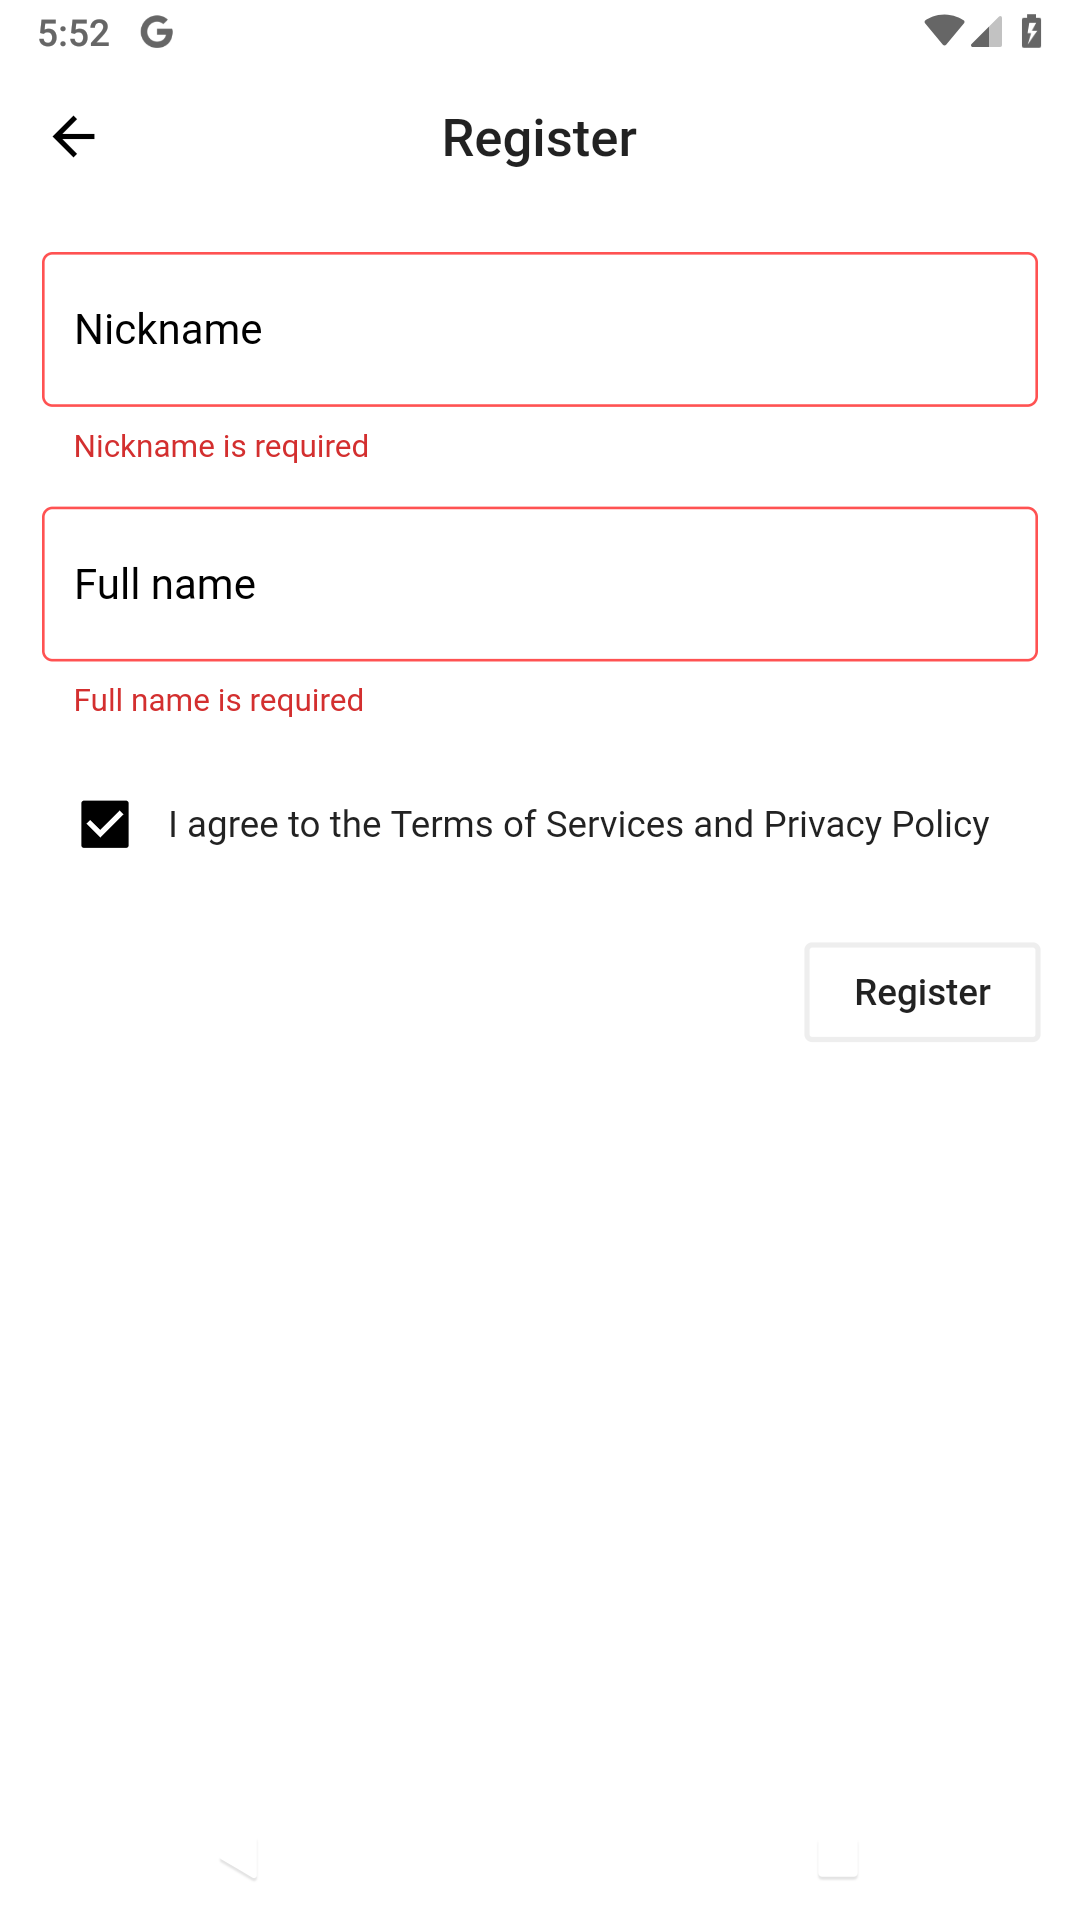 registration form with errors